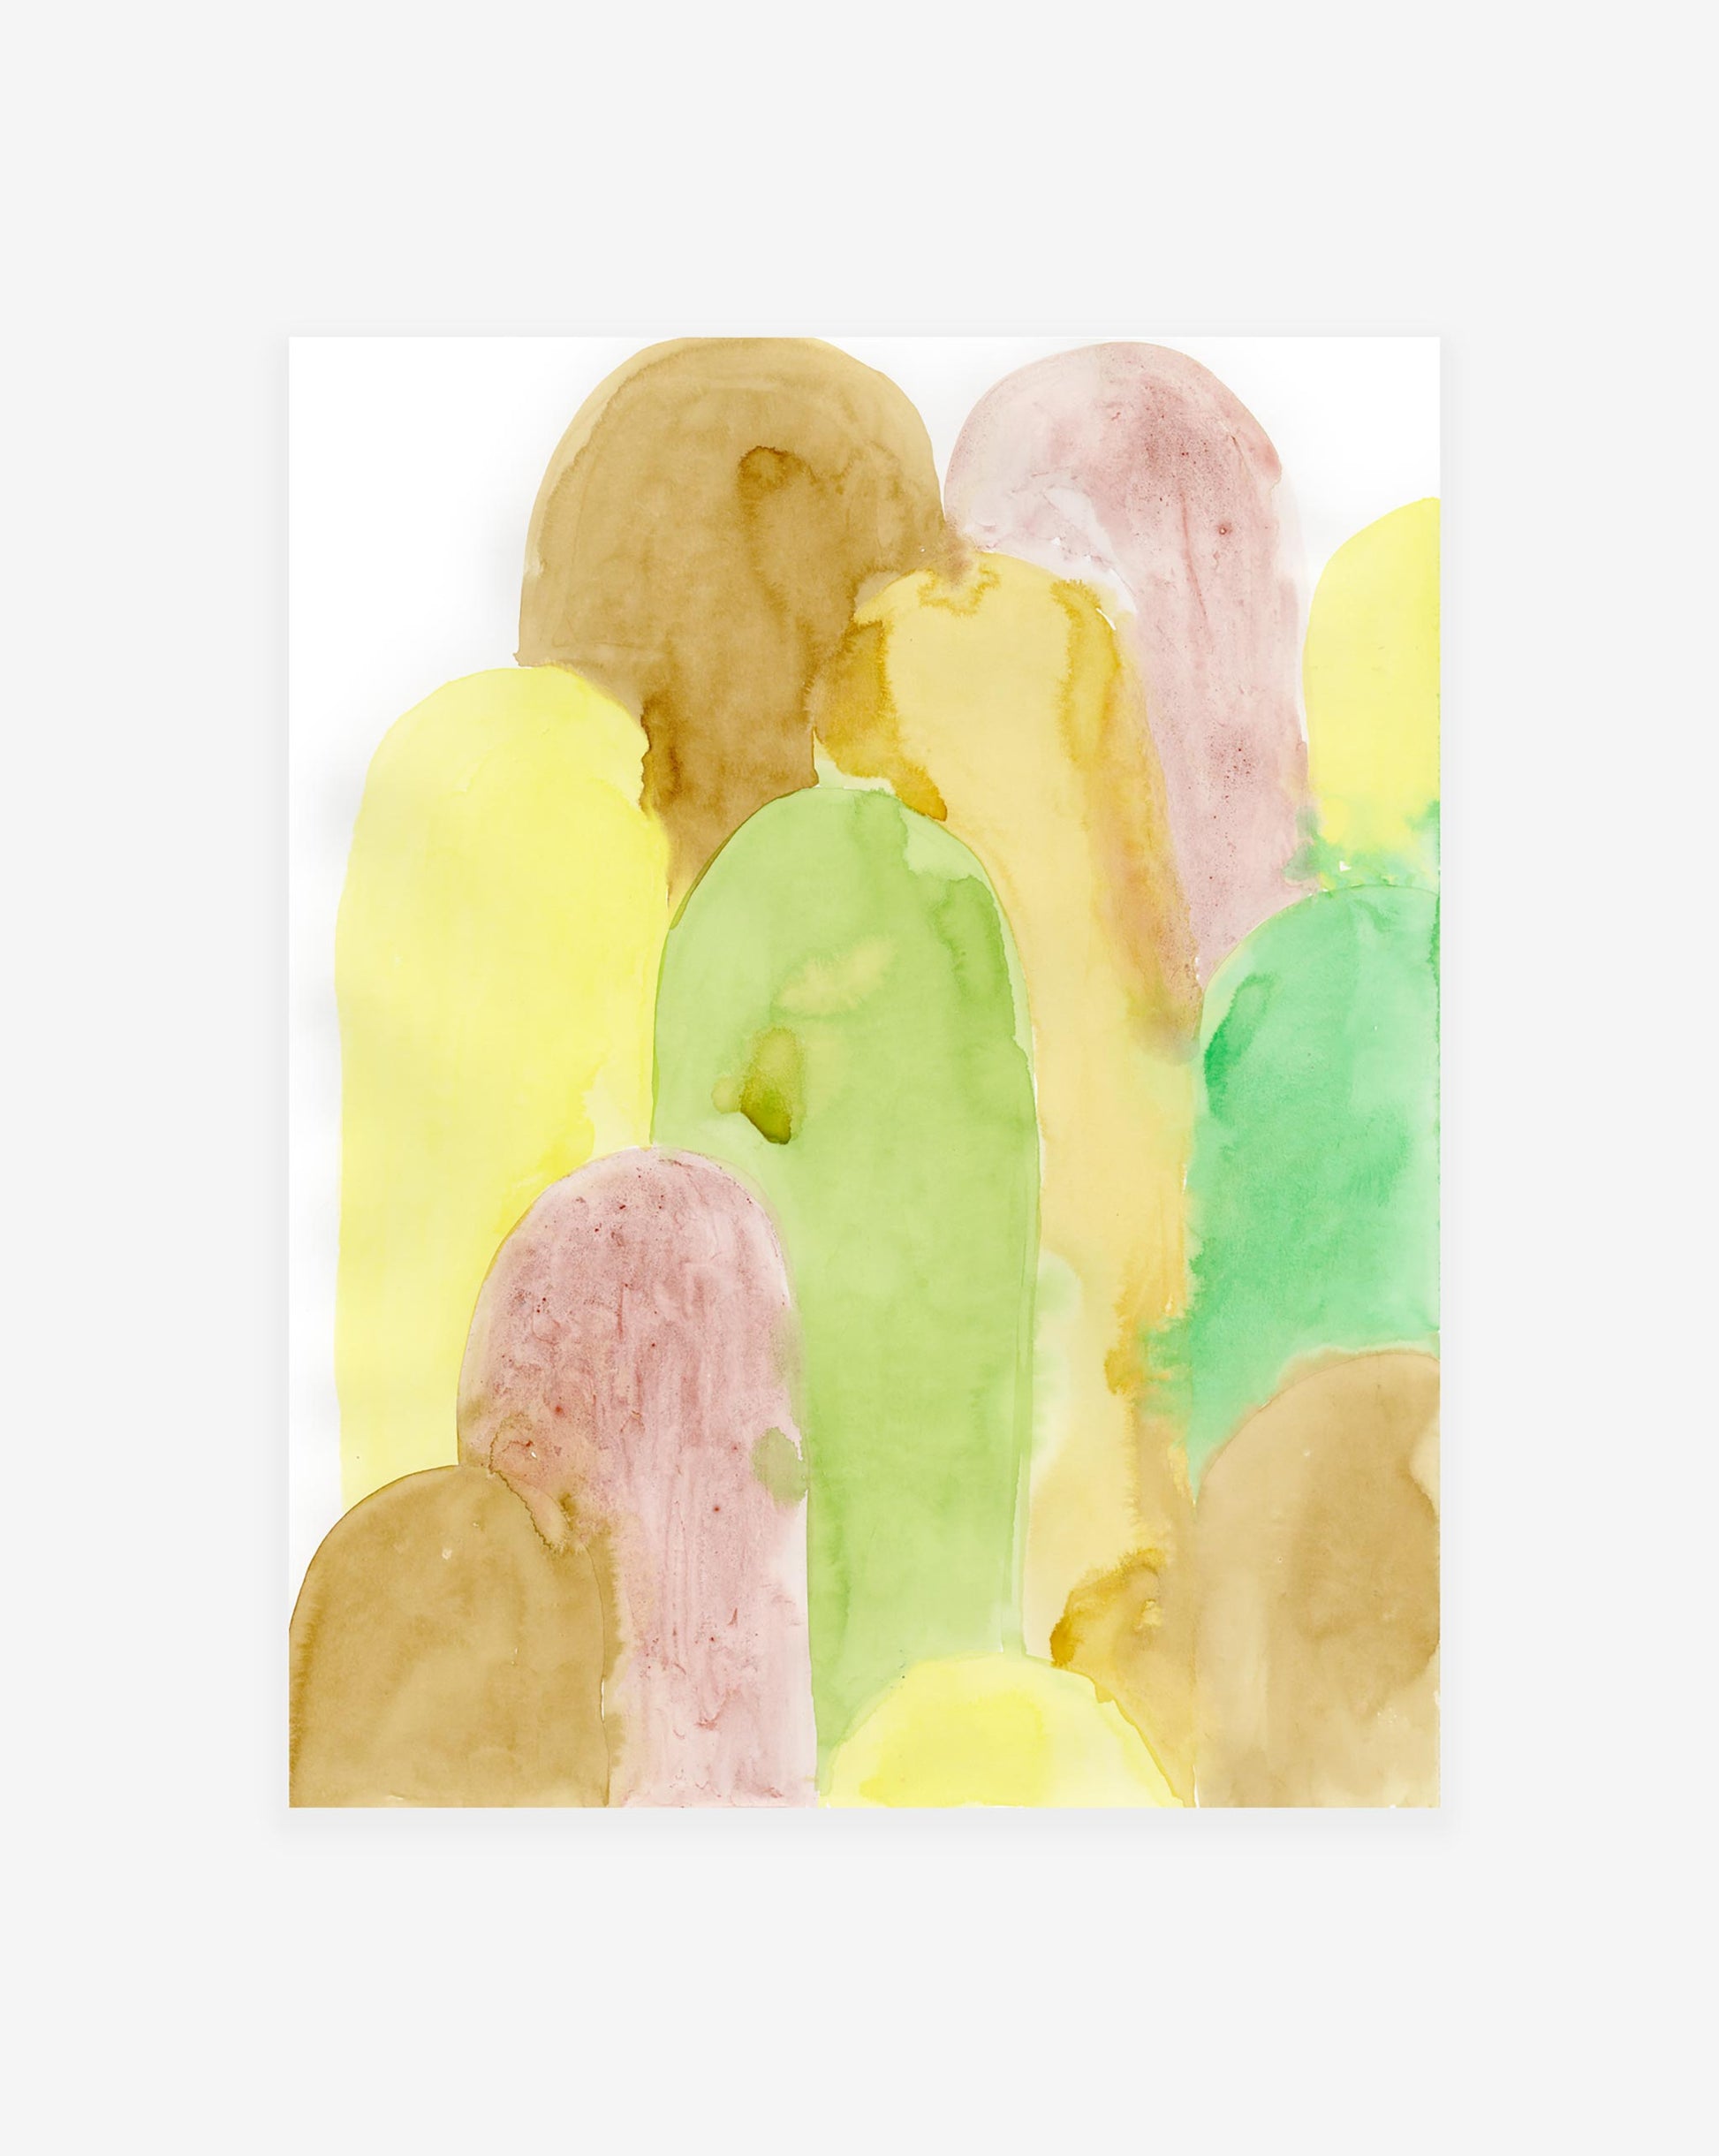 A Nouveau Arches Print by Eskayel founder, an artist, depicting ice cream cones on a white background